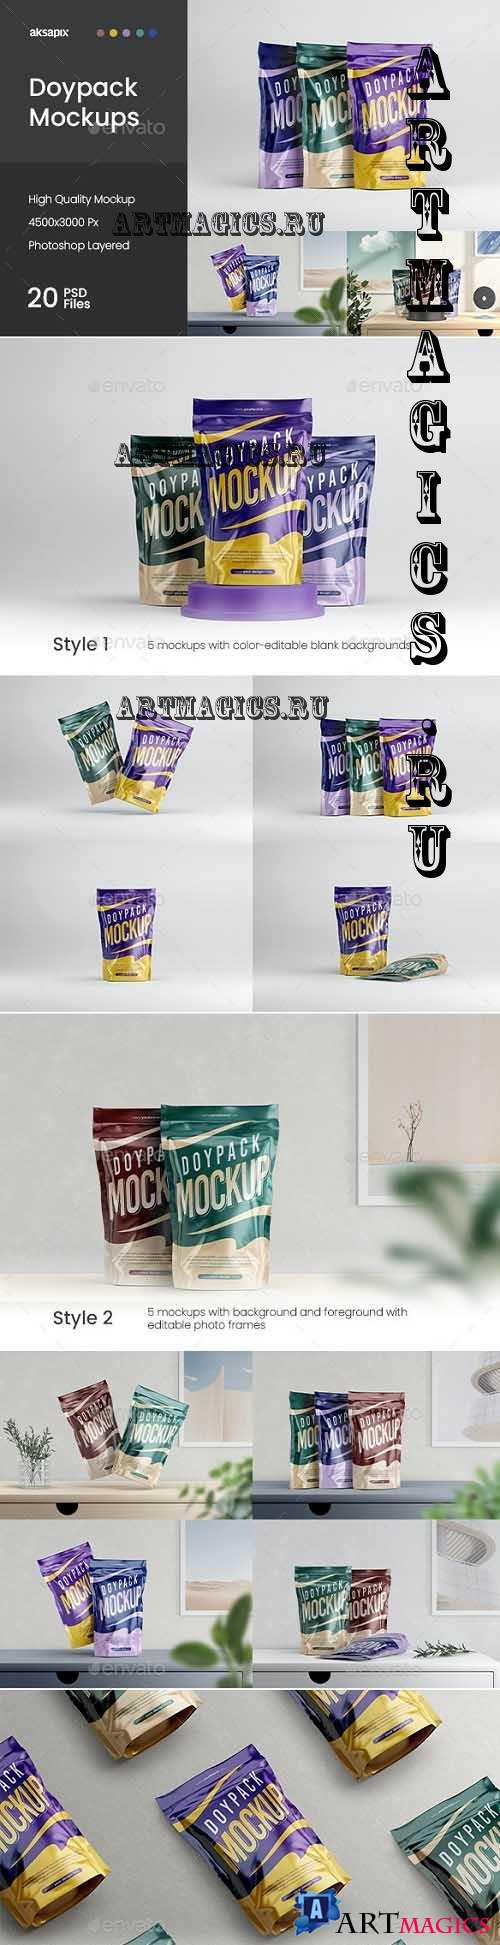 Doypack / Pouch Packaging Mockup - 37045401